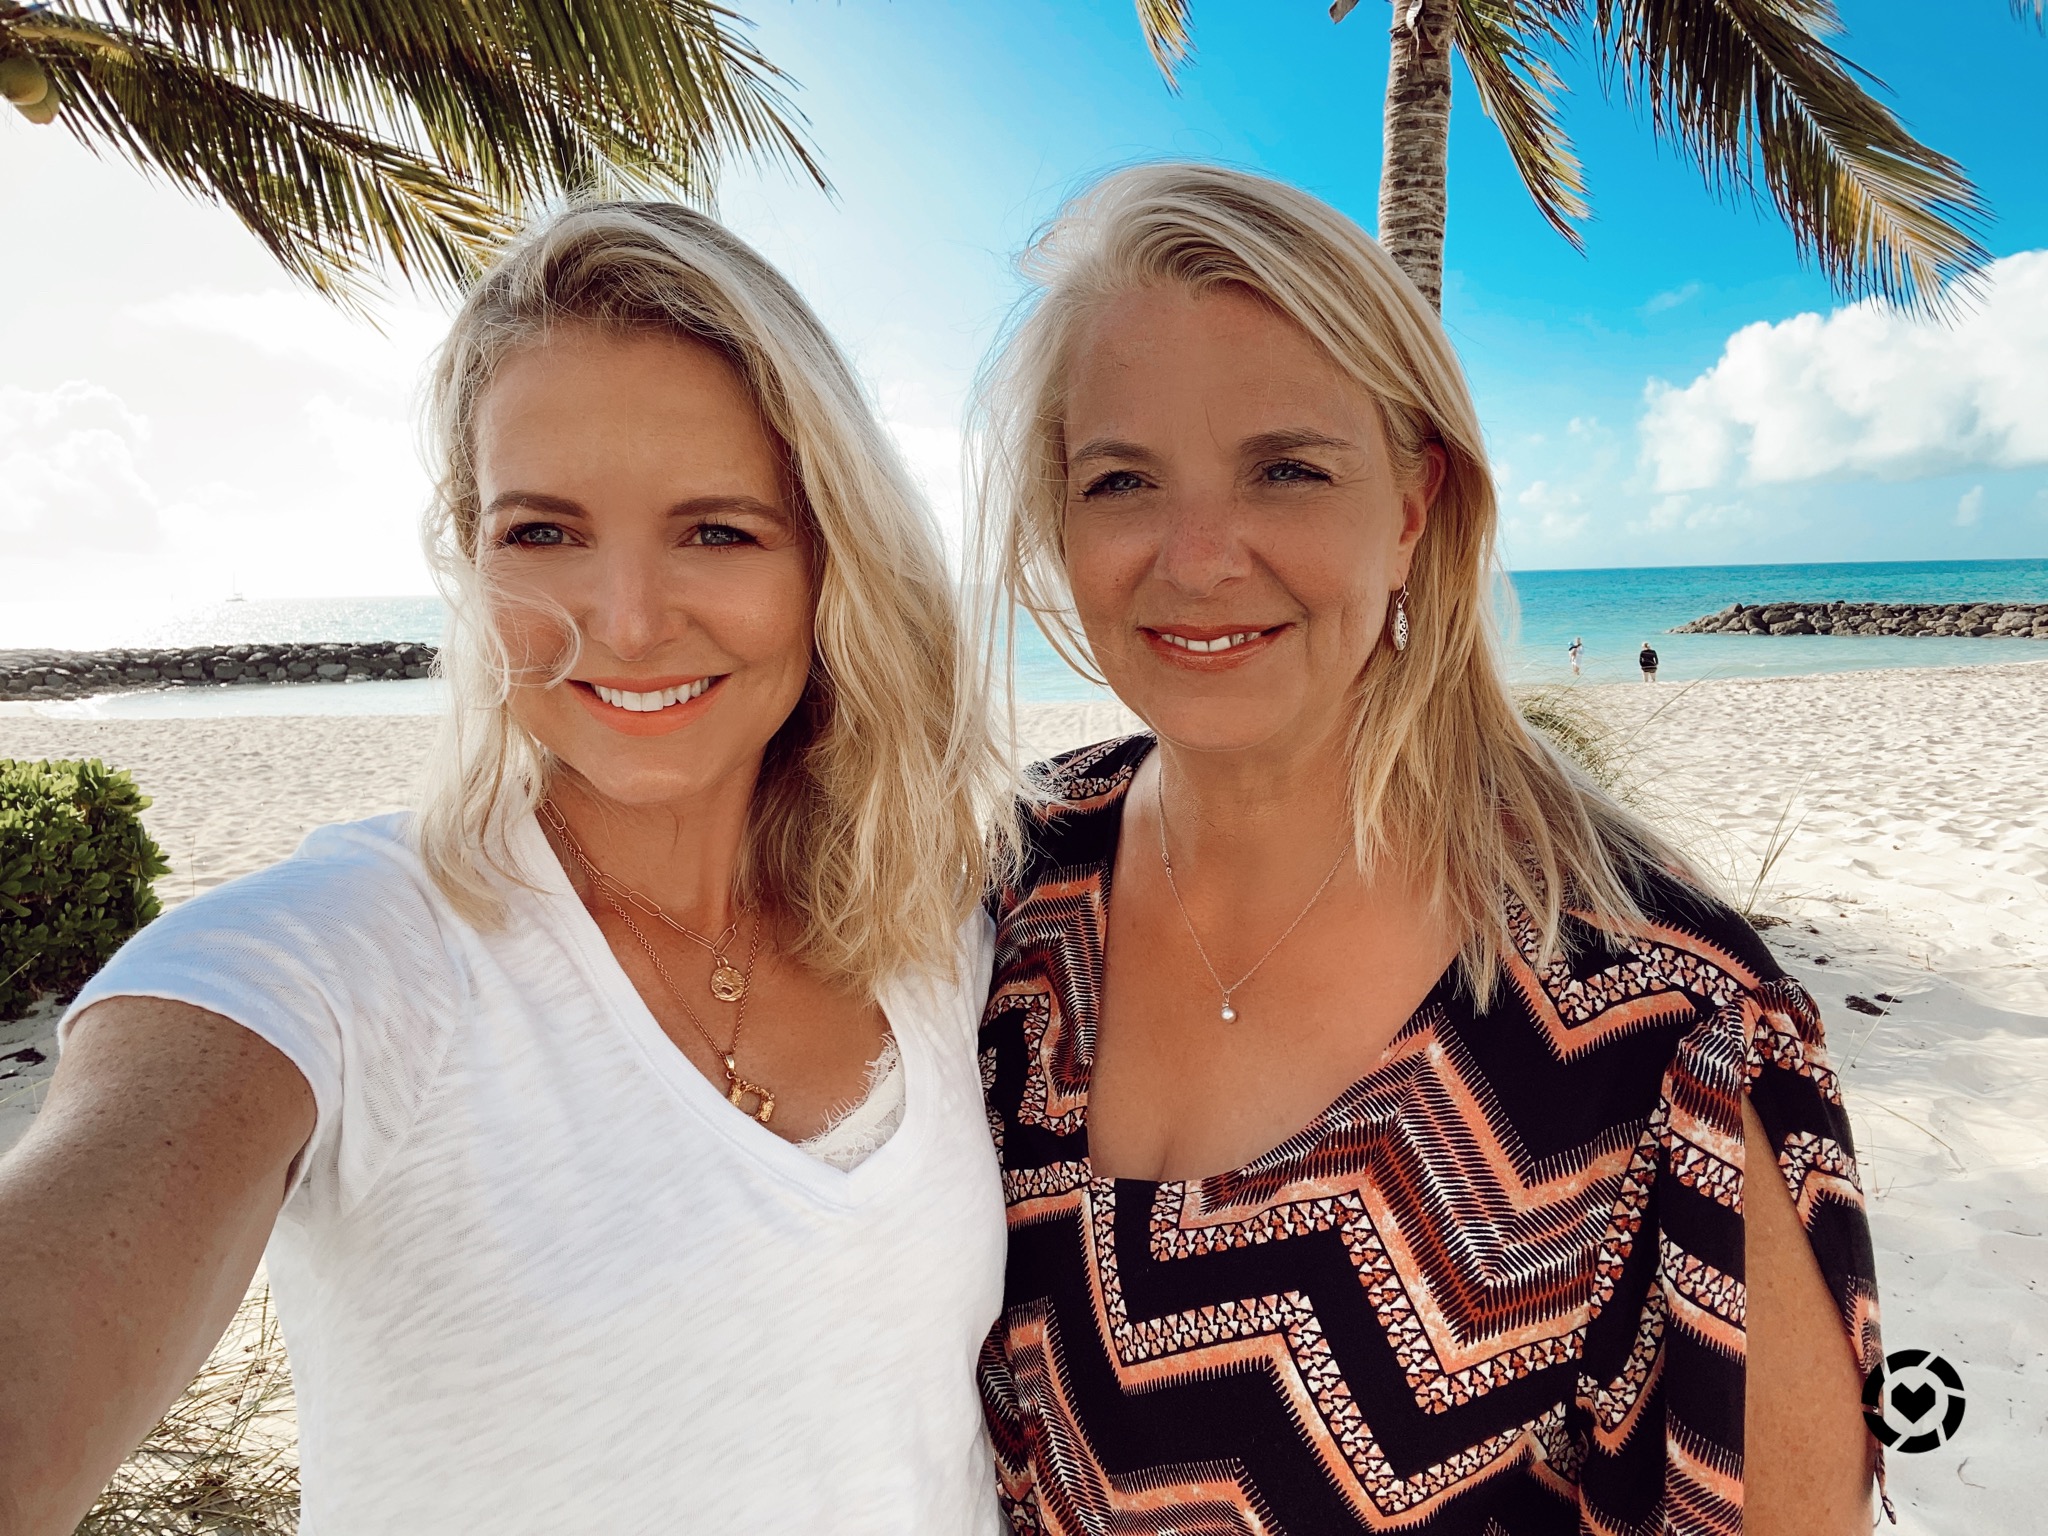 Erin Busbee and her sister Cathy taking a selfie in the Bahamas